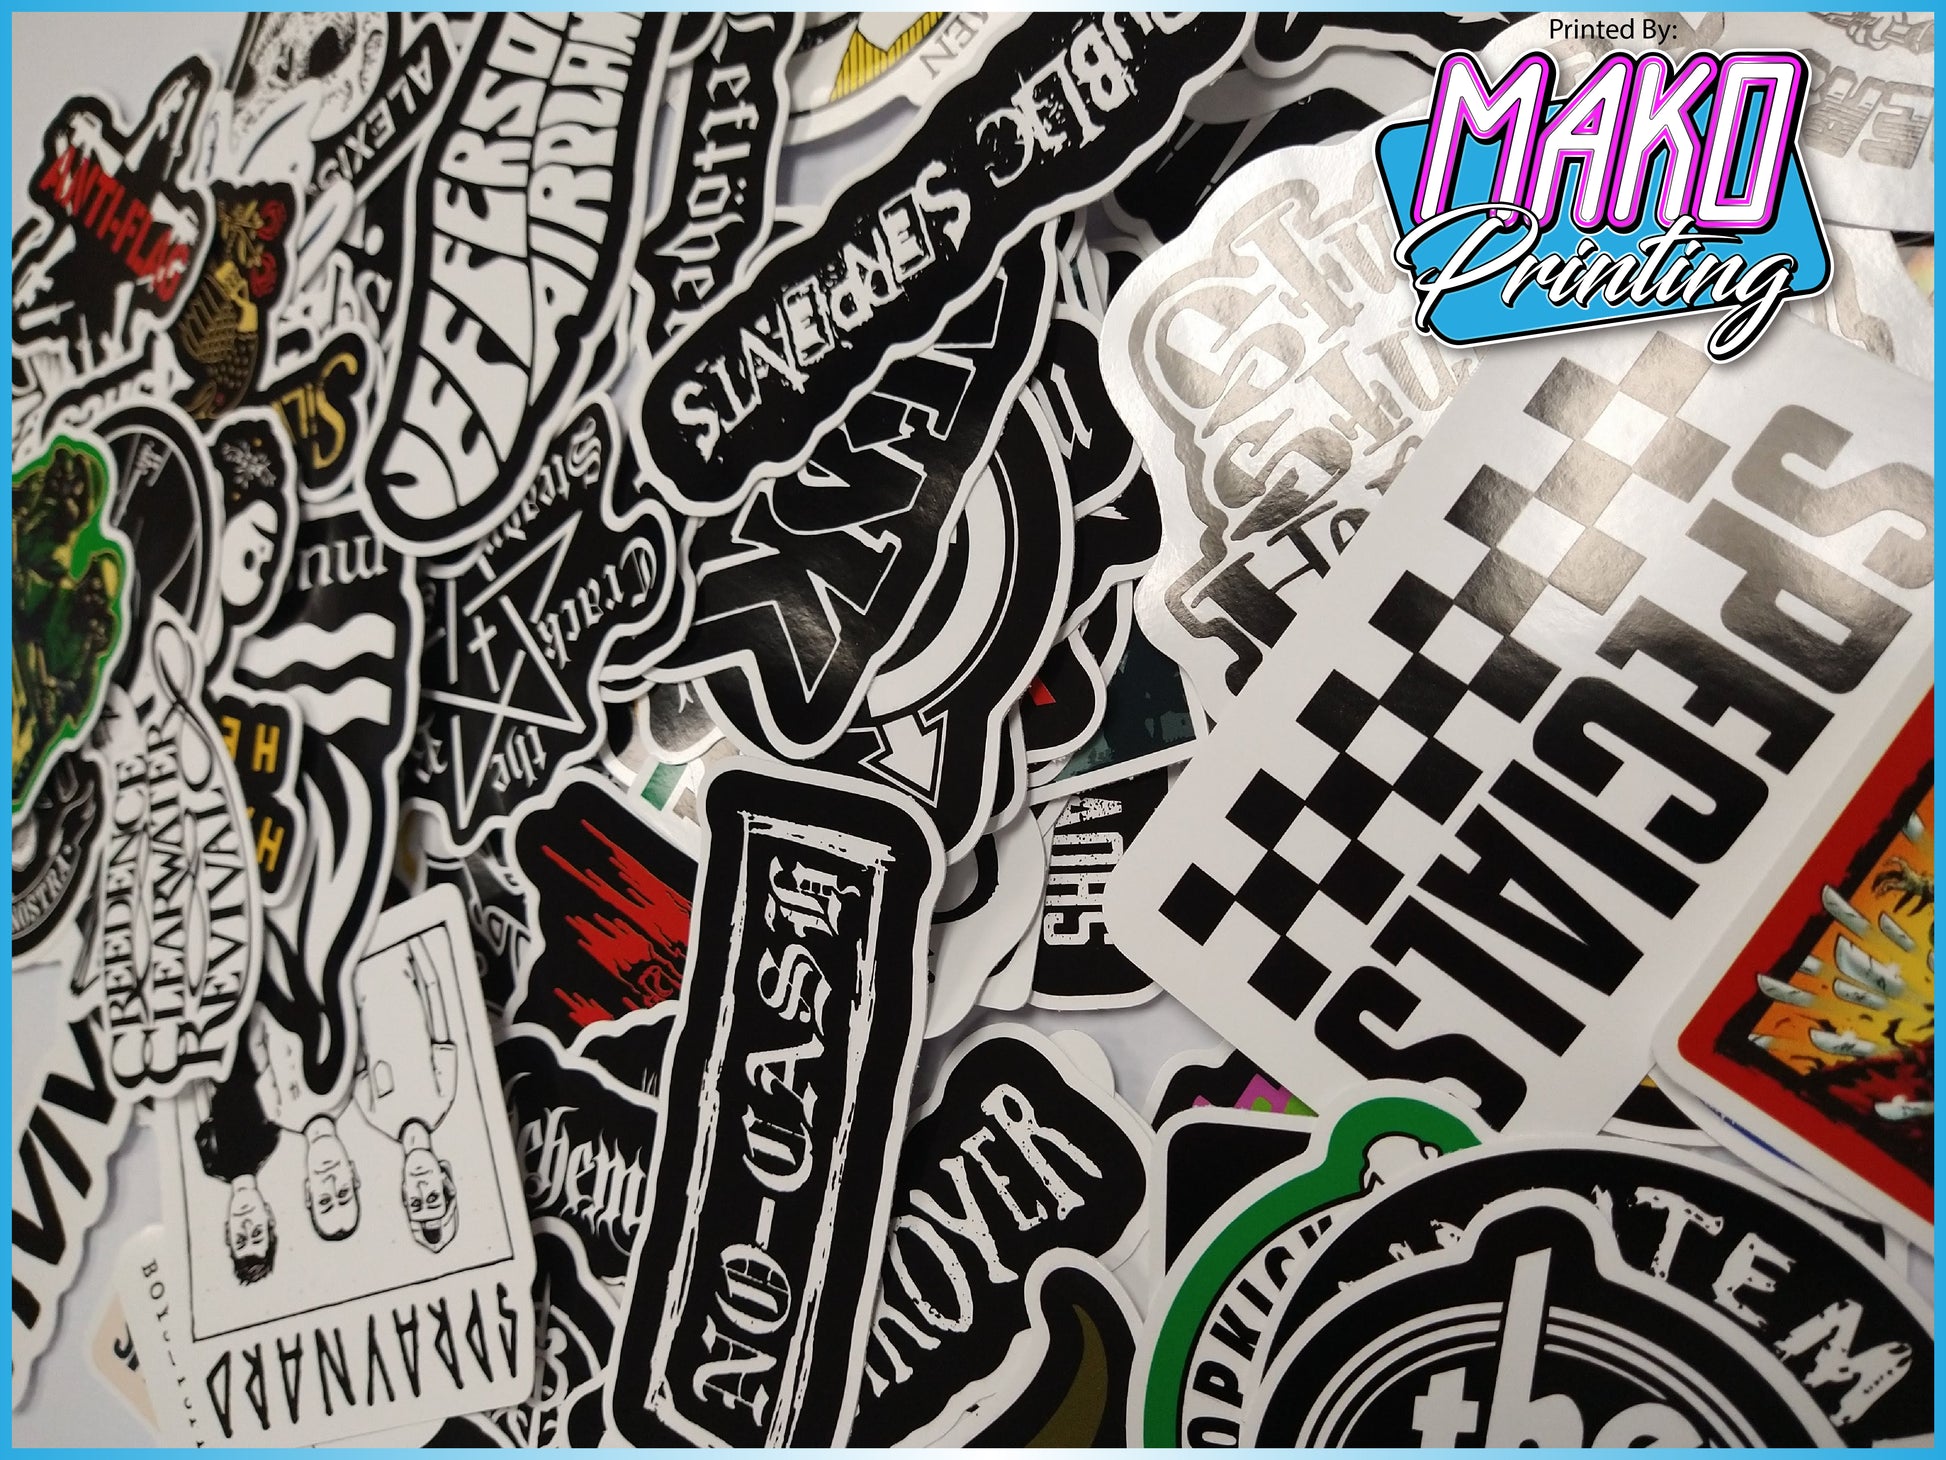 Custom Sticker Pack (10 Stickers) OVER 2000 DESIGNS AVAILABLE! â€“  makoprinting